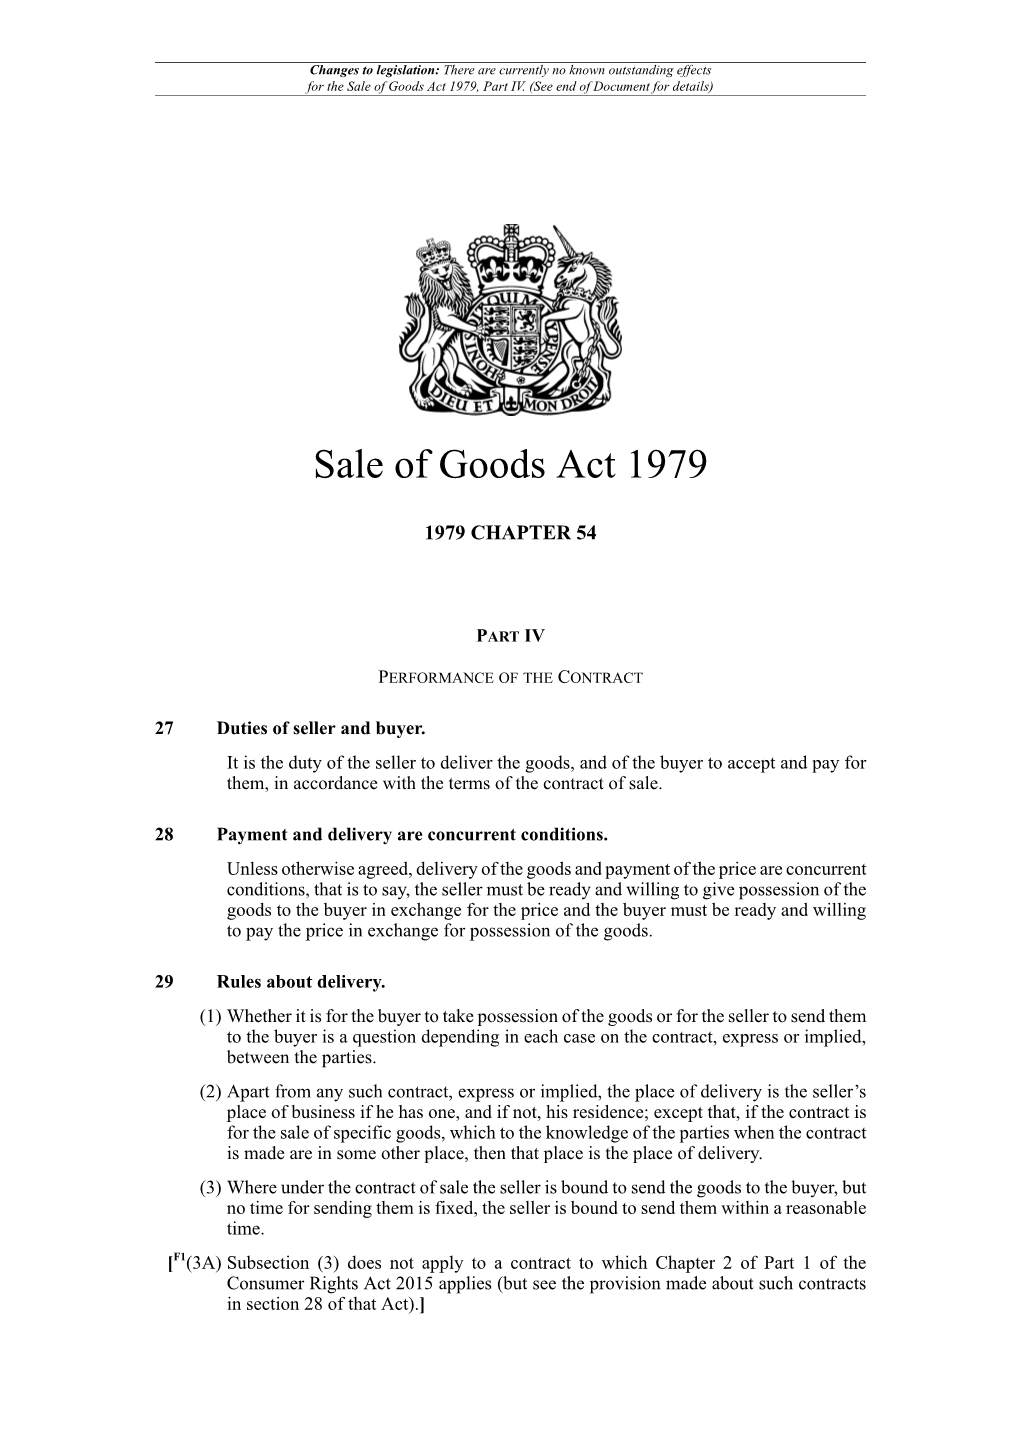 Sale of Goods Act 1979, Part IV